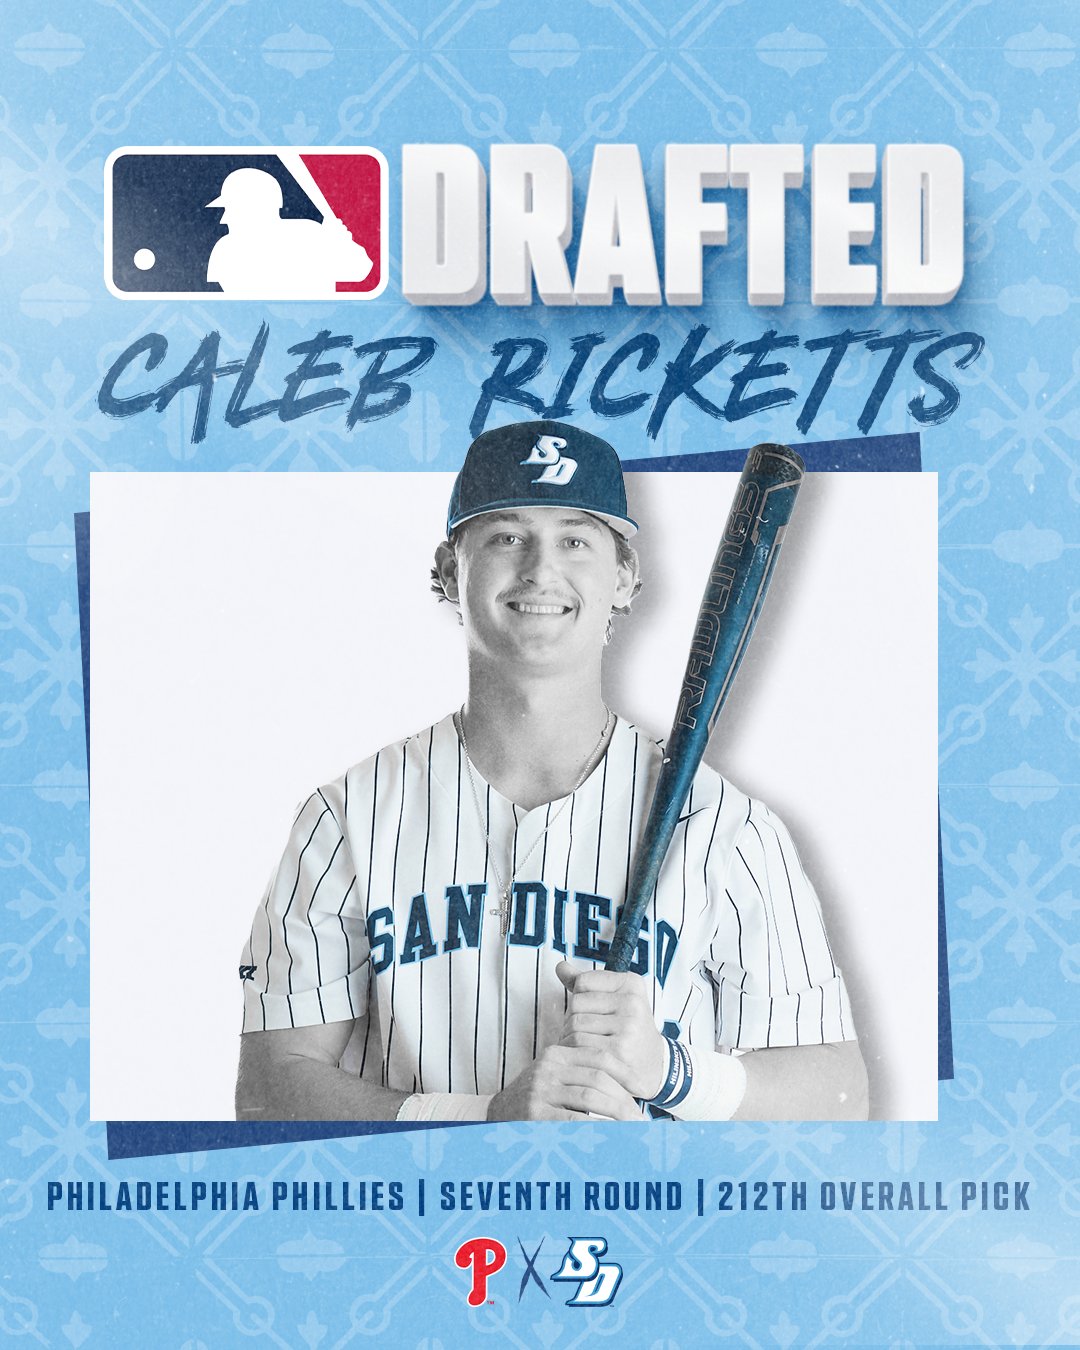 Caleb Ricketts Drafted in Seventh Round by Philadelphia Phillies